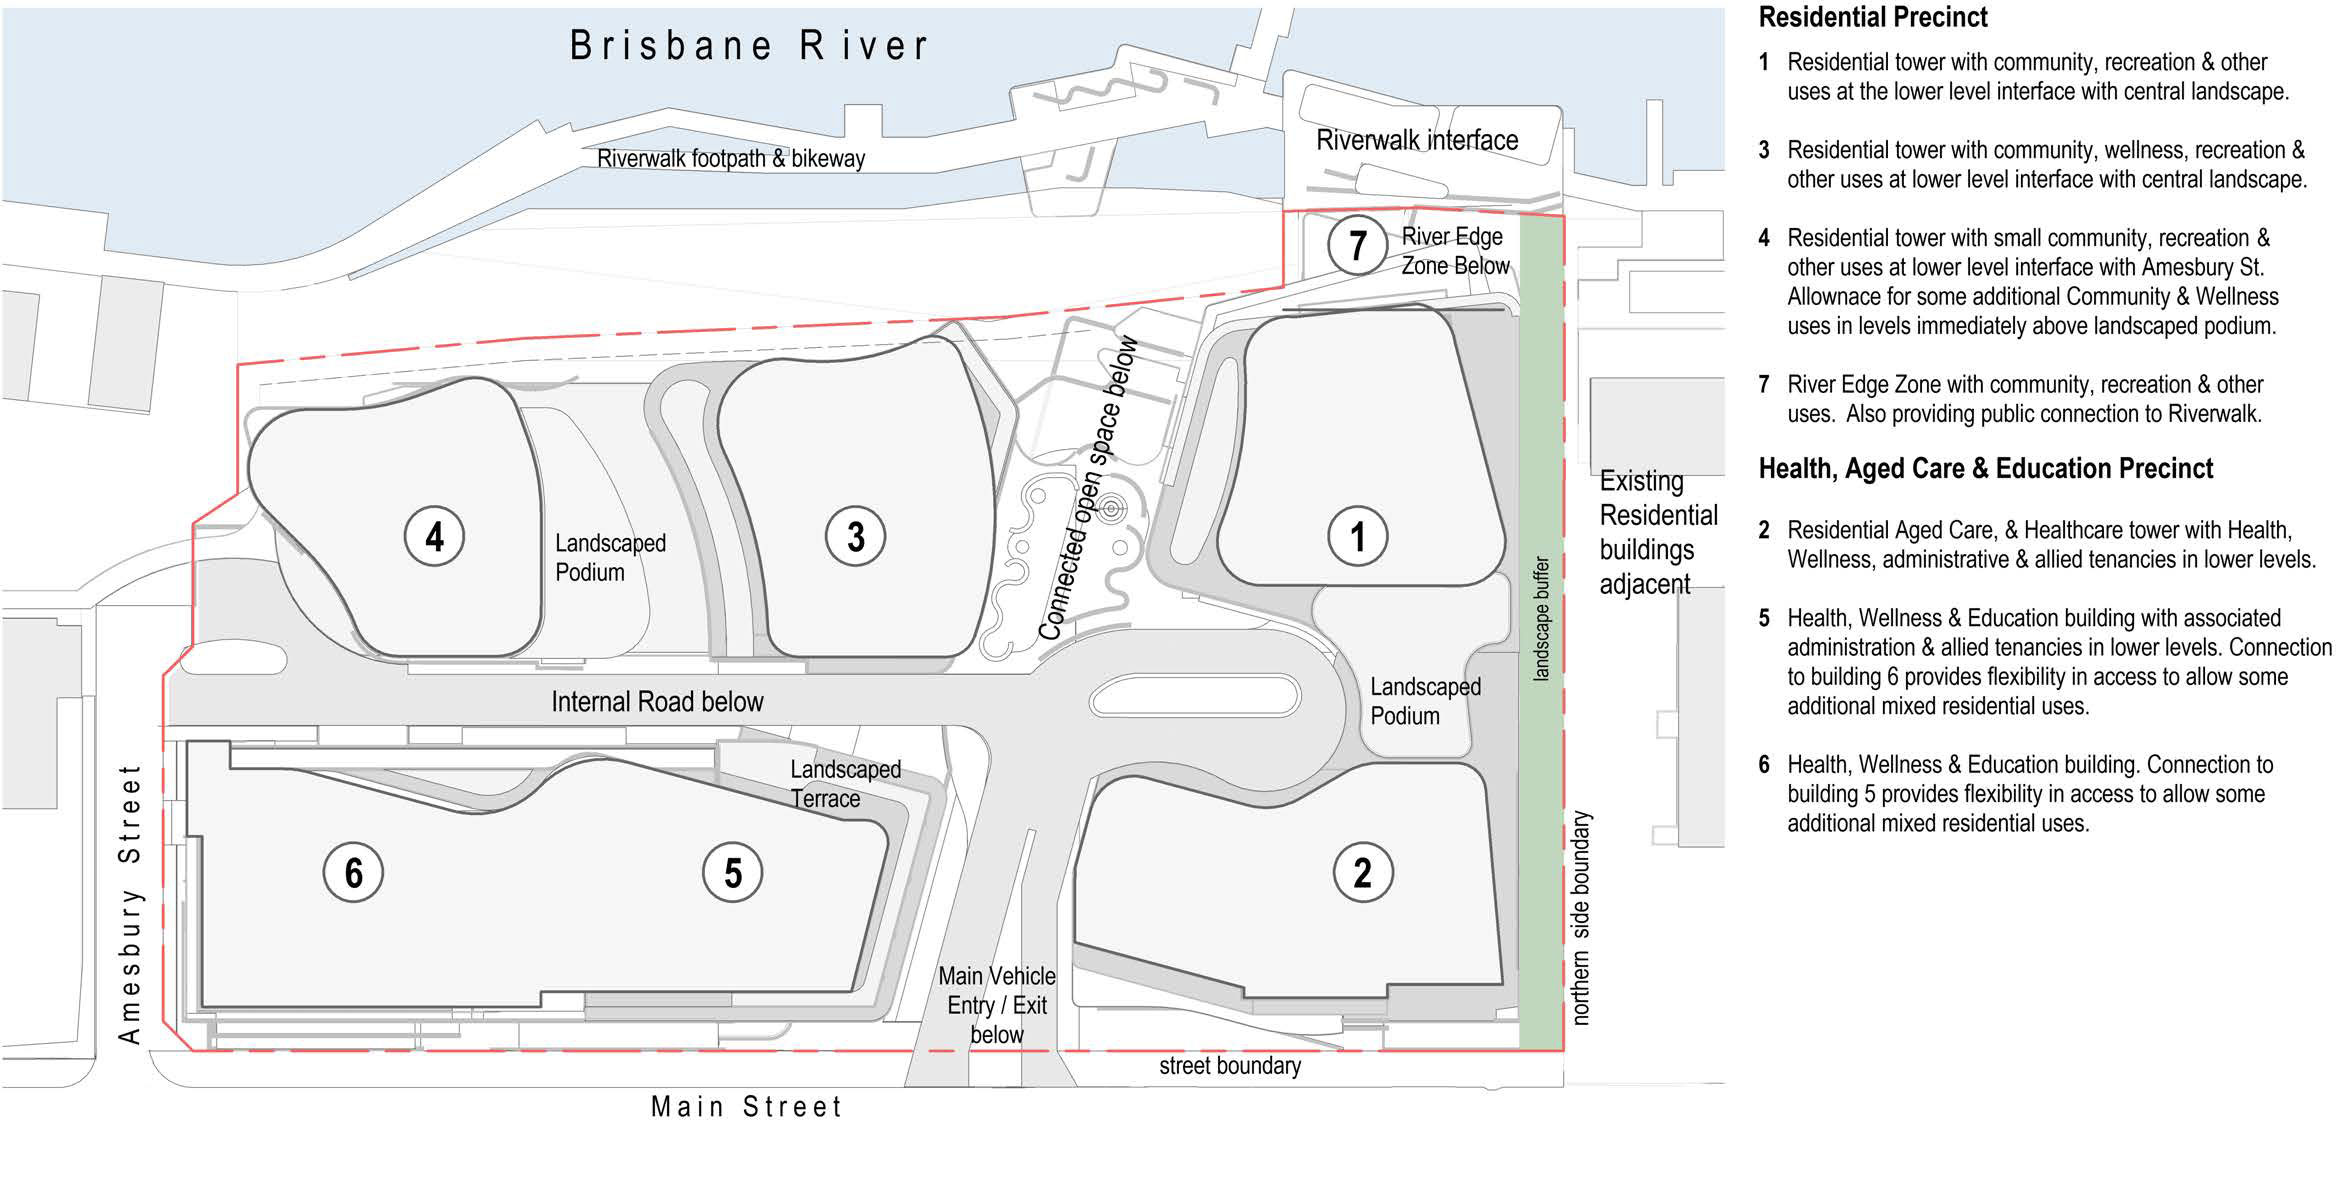 Proposed precincts as part of the Kangaroo Point Integrated Wellness Community